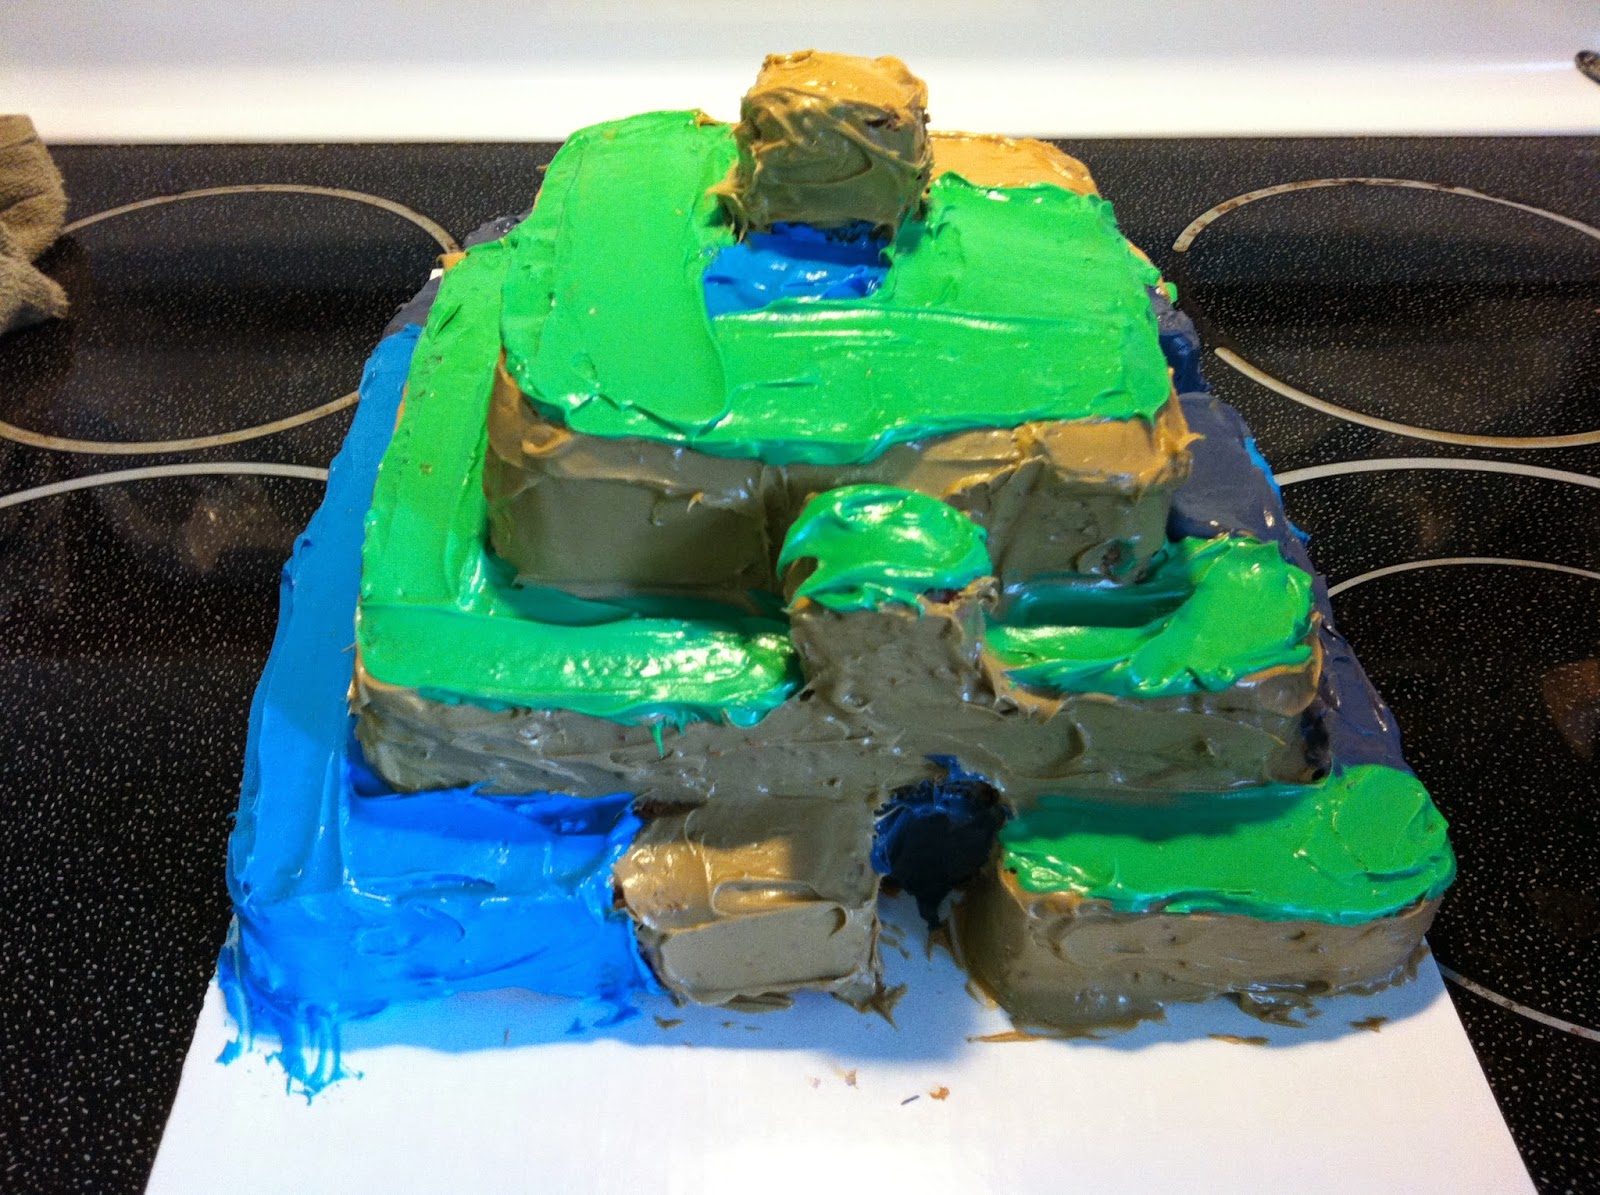 Minecraft cake side 2, featuring a cavern.